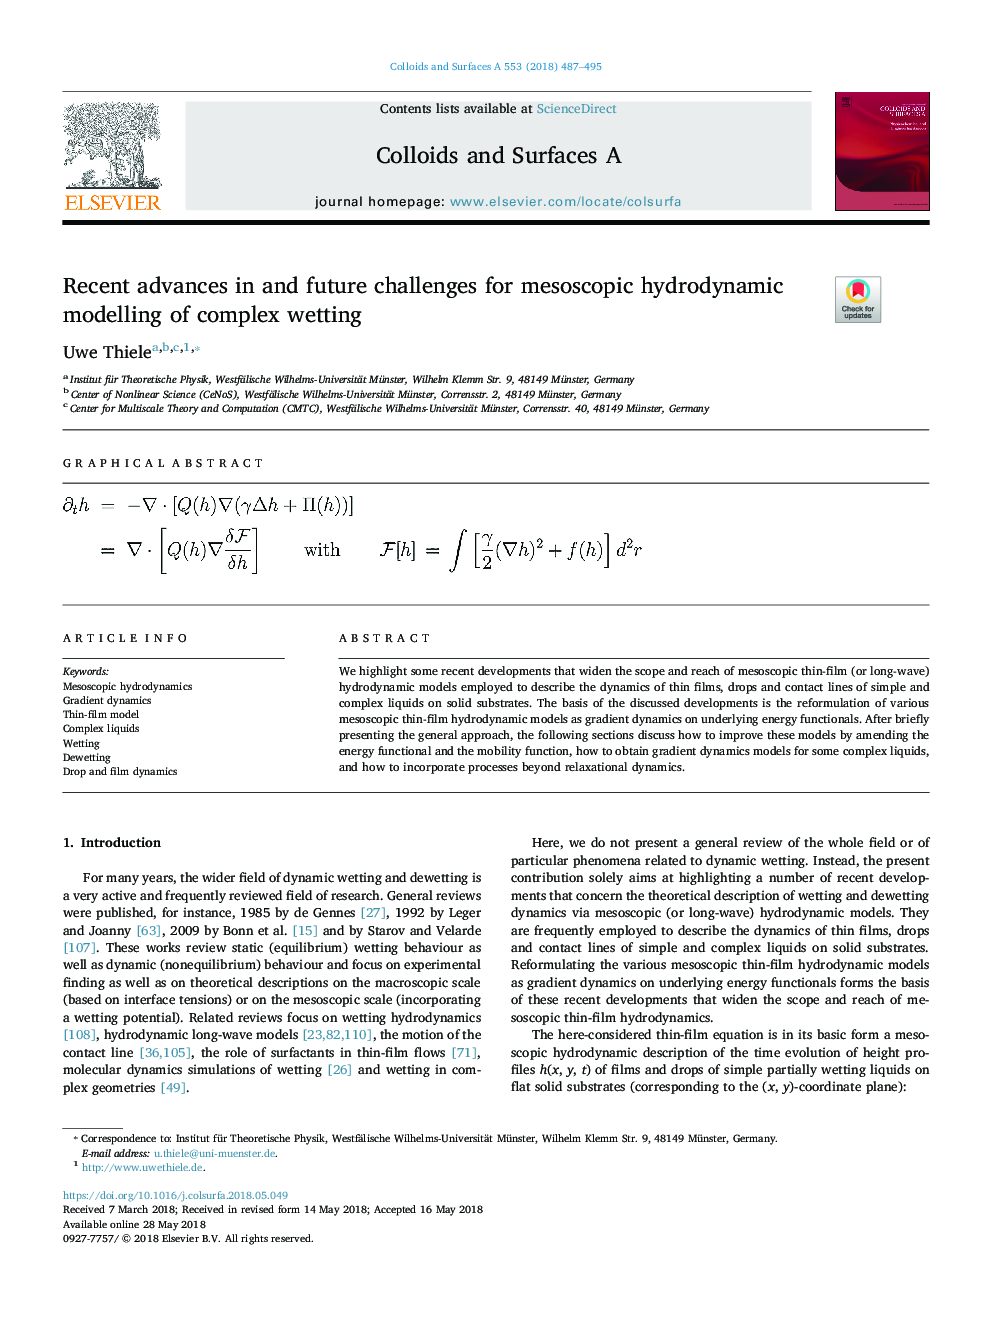 Recent advances in and future challenges for mesoscopic hydrodynamic modelling of complex wetting